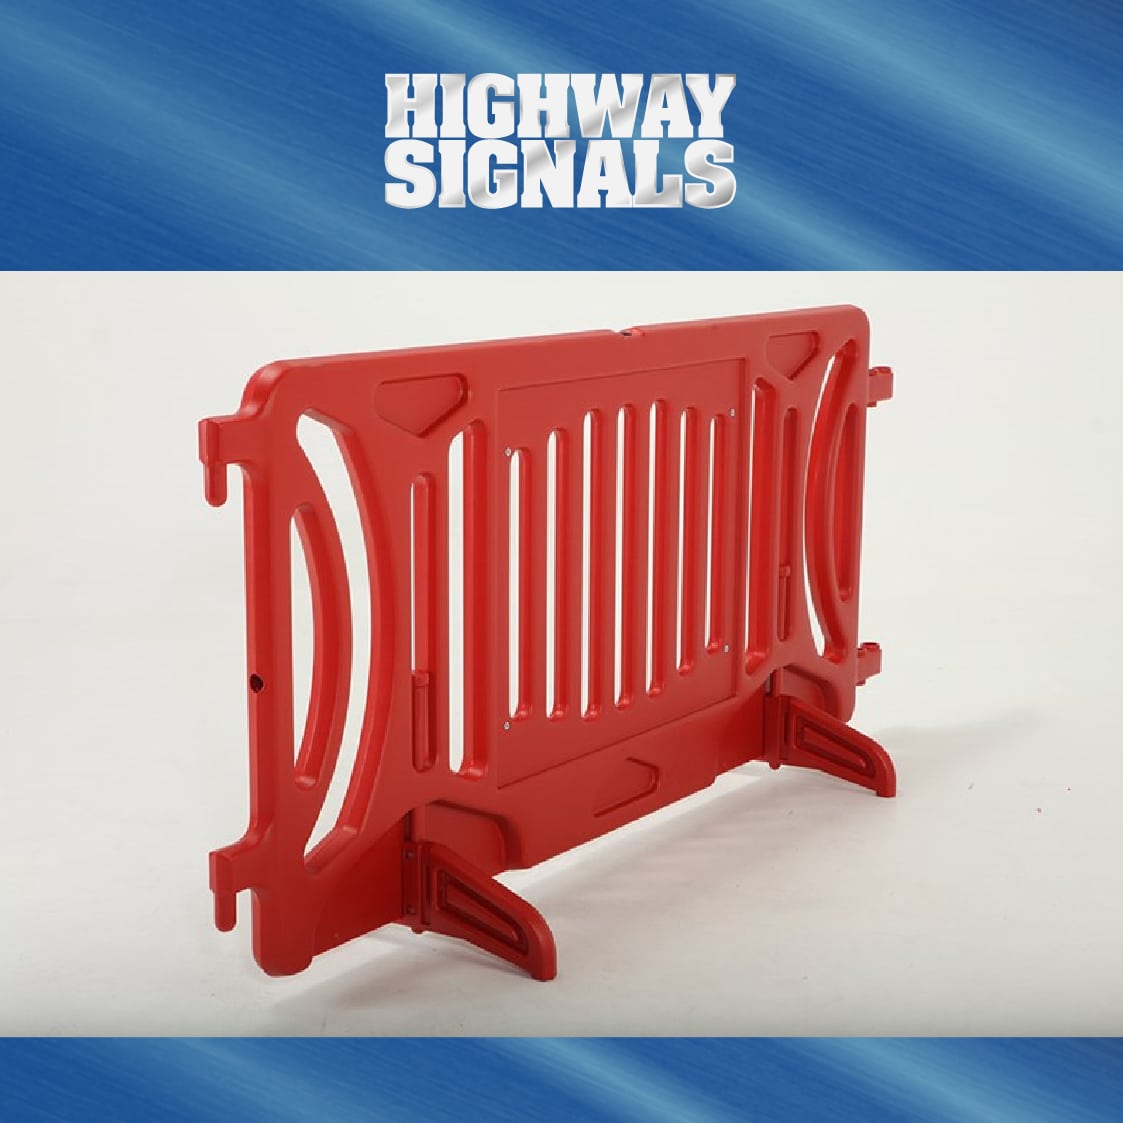 42 x 96 Plastic Barricade In Red Color